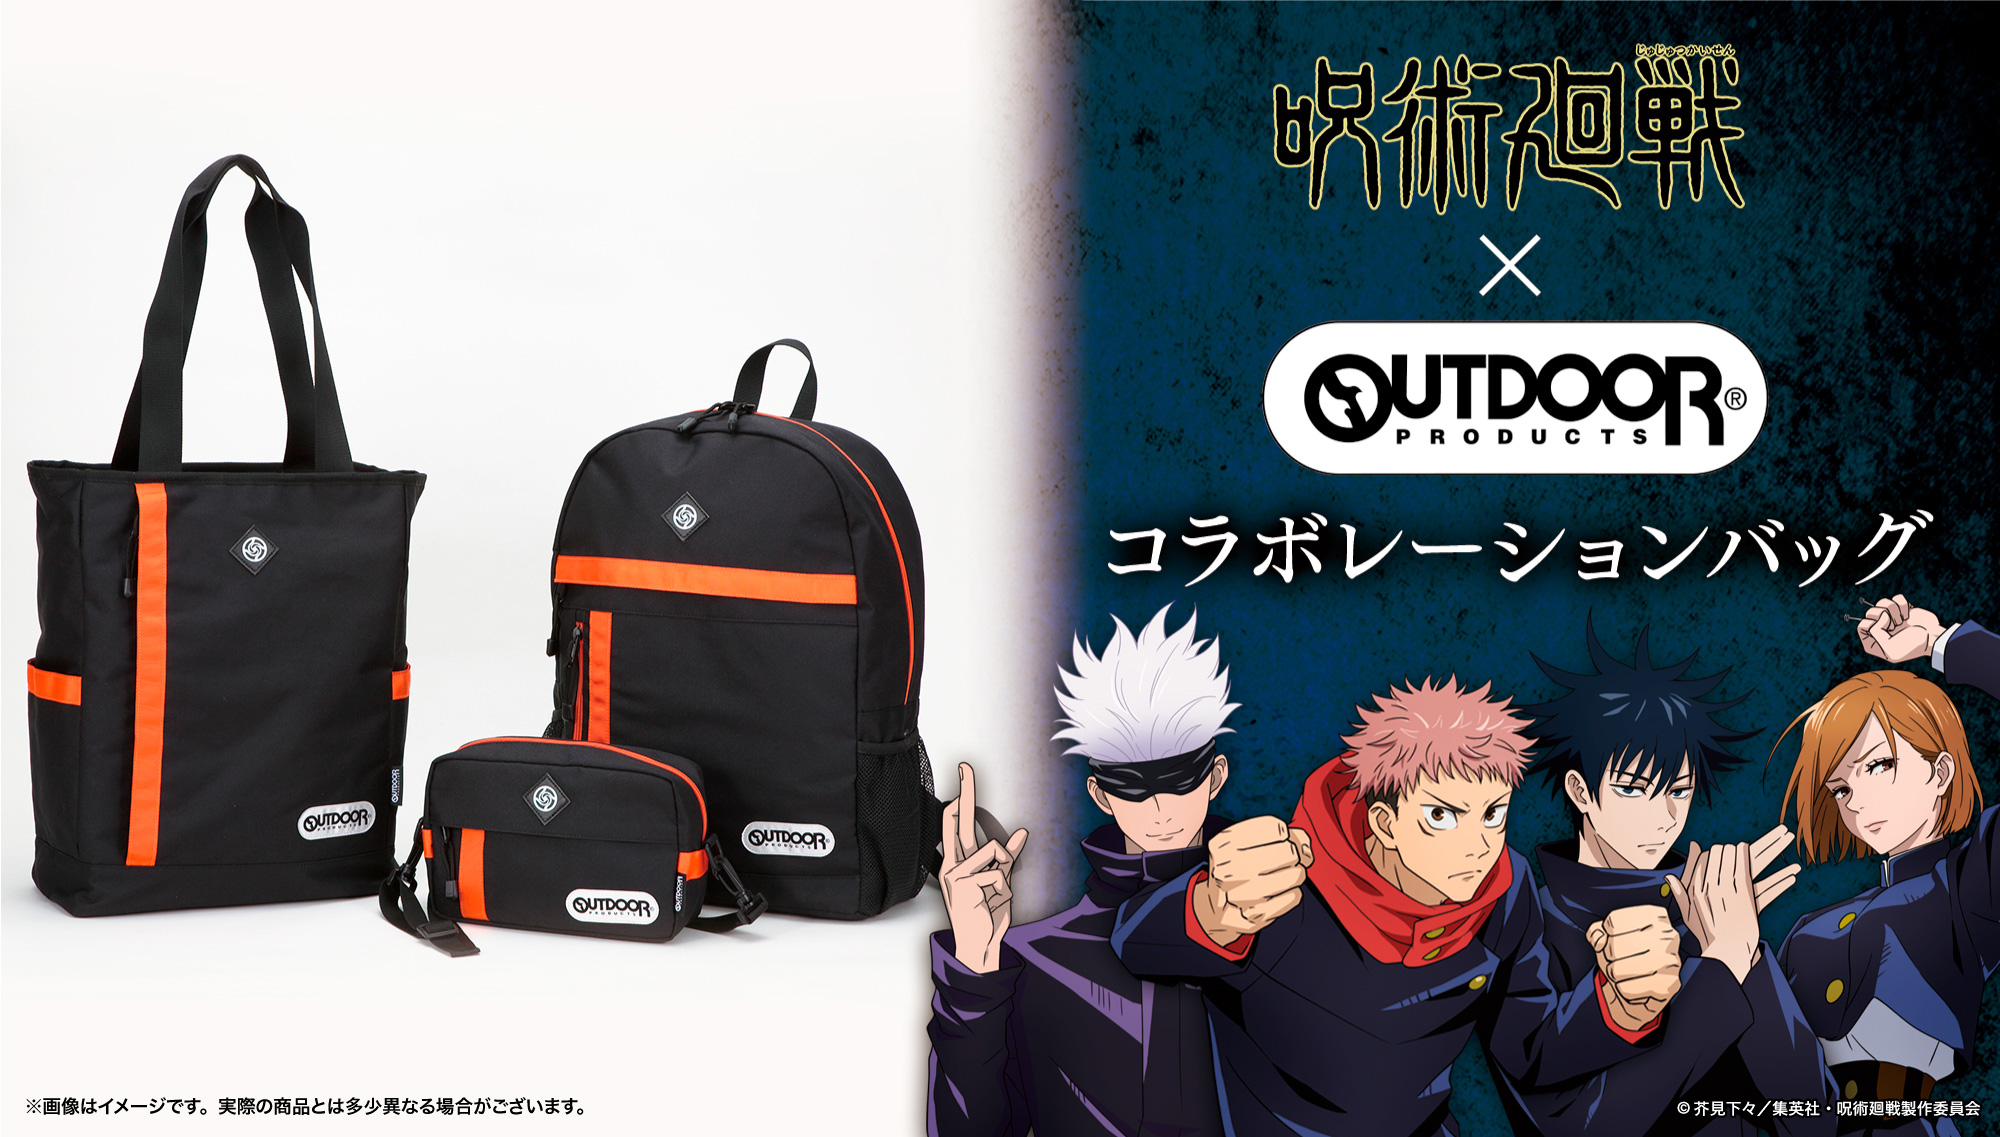 OUTDOOR PRODUCTS x Jujutsu Kaisen Bag Collection Features Yuji